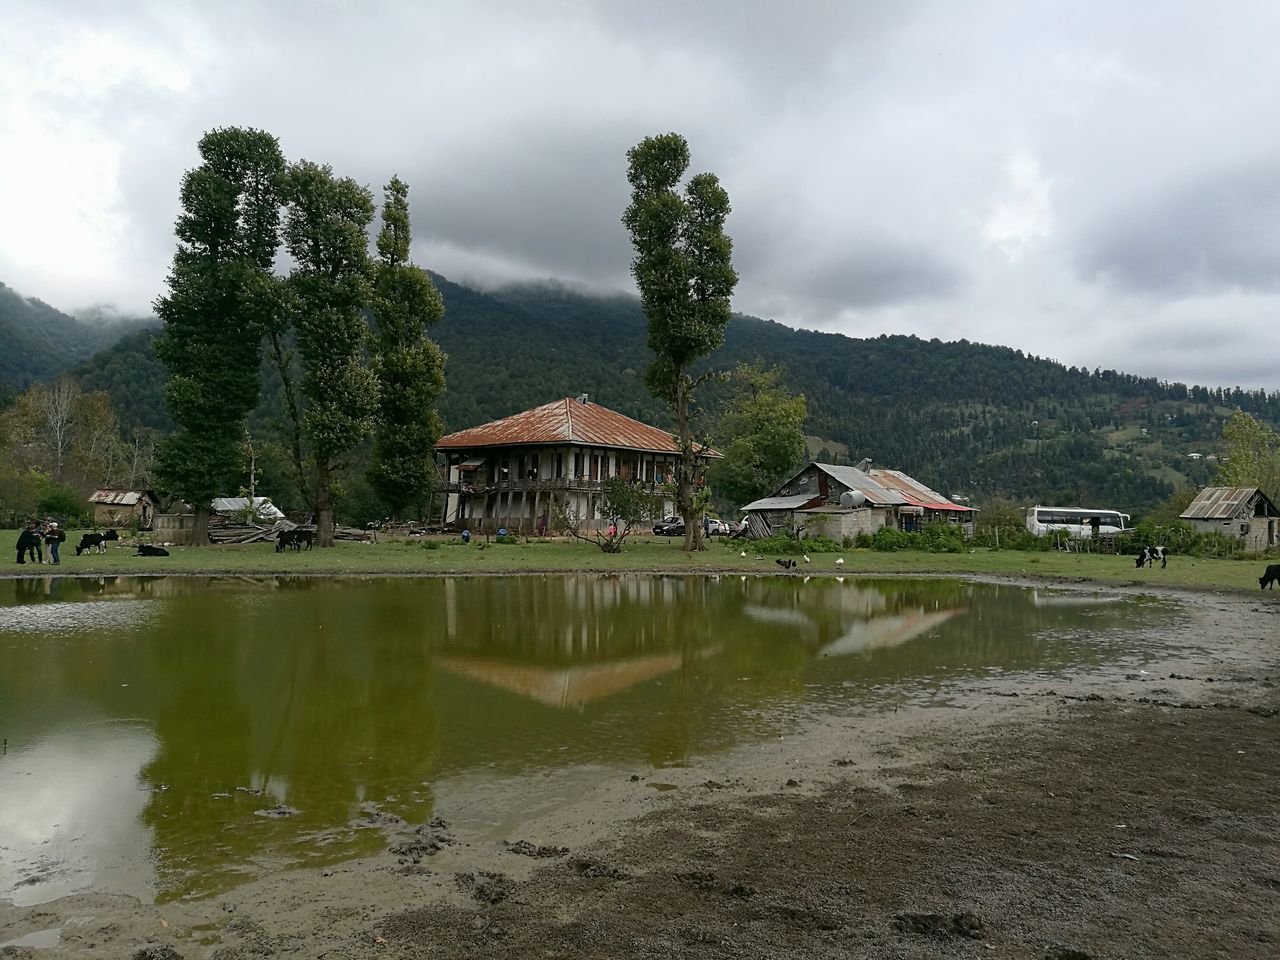 architecture, built structure, water, cloud - sky, building exterior, tree, sky, mountain, cloudy, house, scenics, tranquility, tranquil scene, nature, reflection, beauty in nature, waterfront, remote, outdoors, in front of, non-urban scene, no people, green color, solitude, mountain range